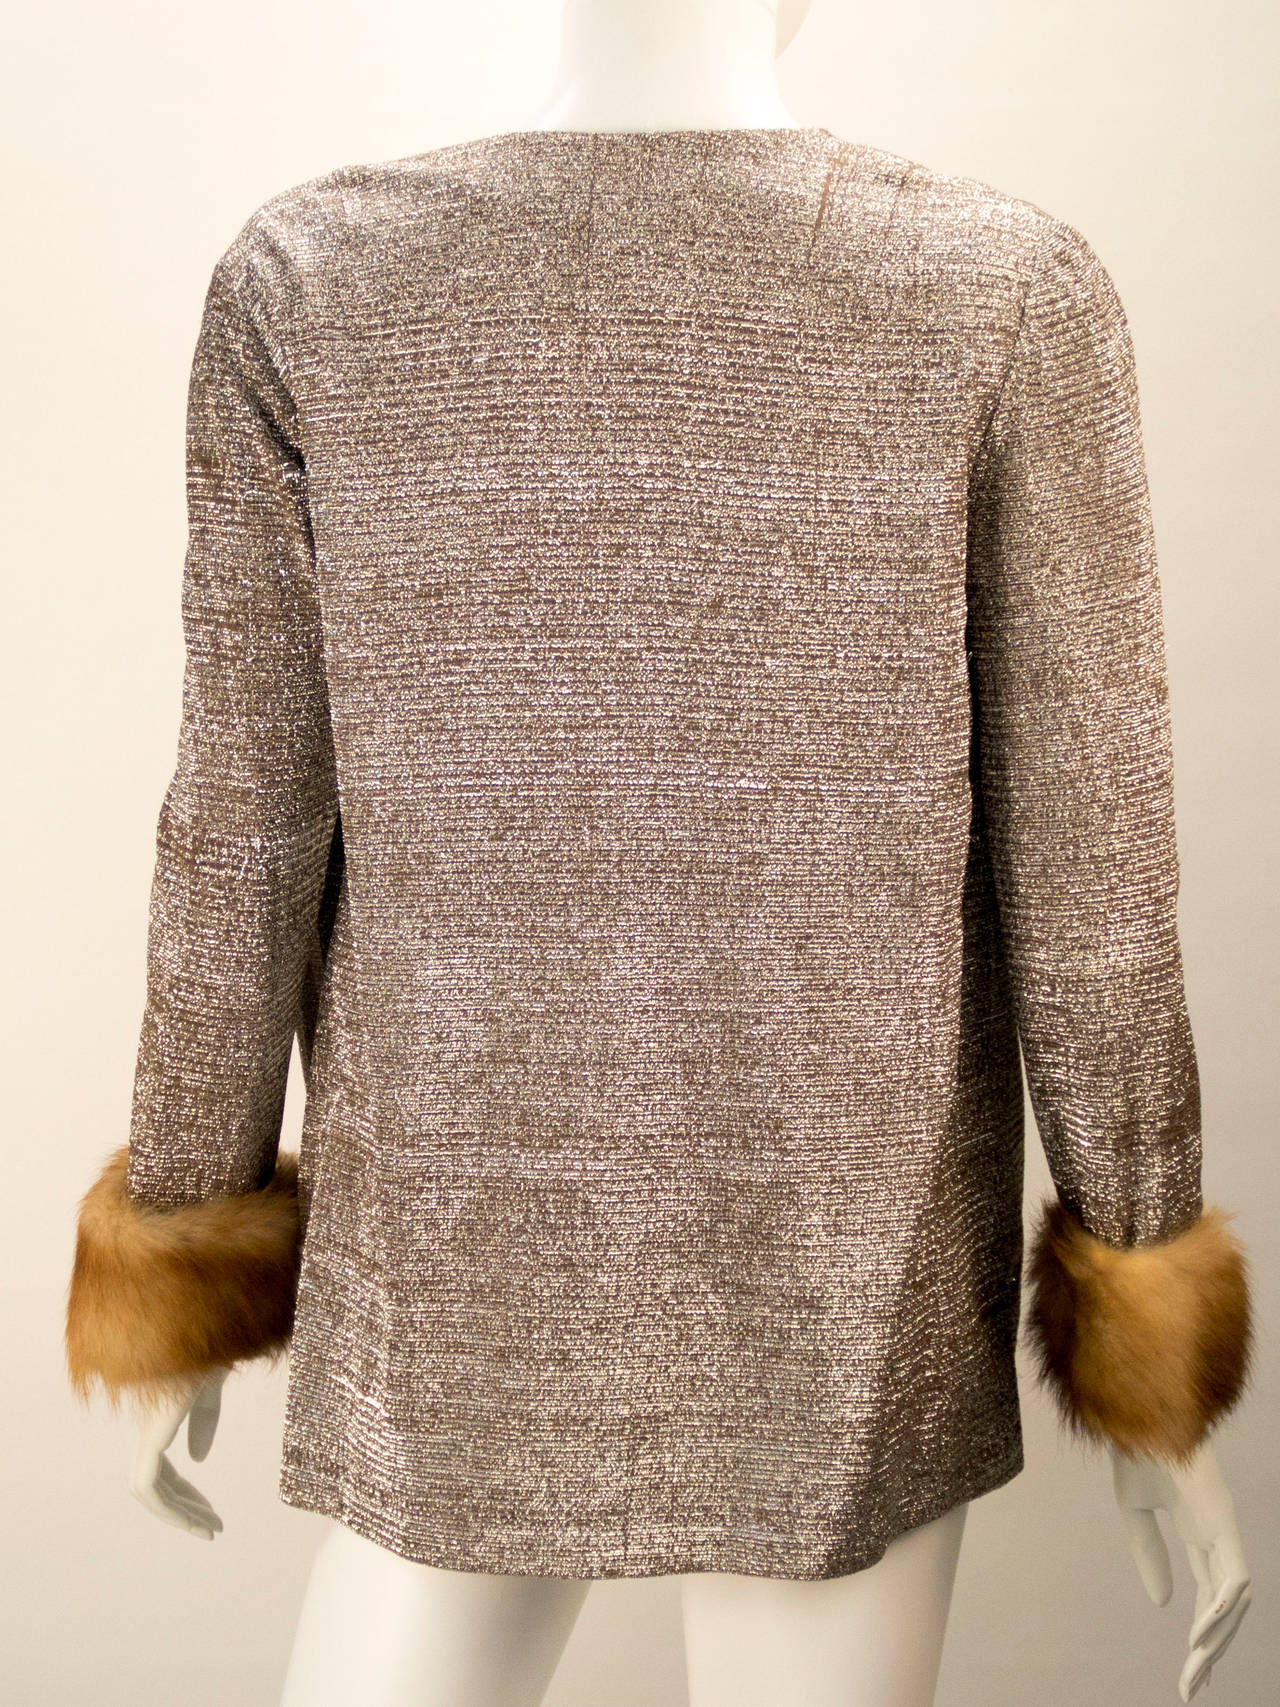 Metallic knit light weight jacket with mink cuffs adds glamour and a warmth to anything your wearing.  This beautiful piece is beautifully lined. Oscar de la Renta and Silver Key/Neiman Marcus labels.

*All garments and accessories have been